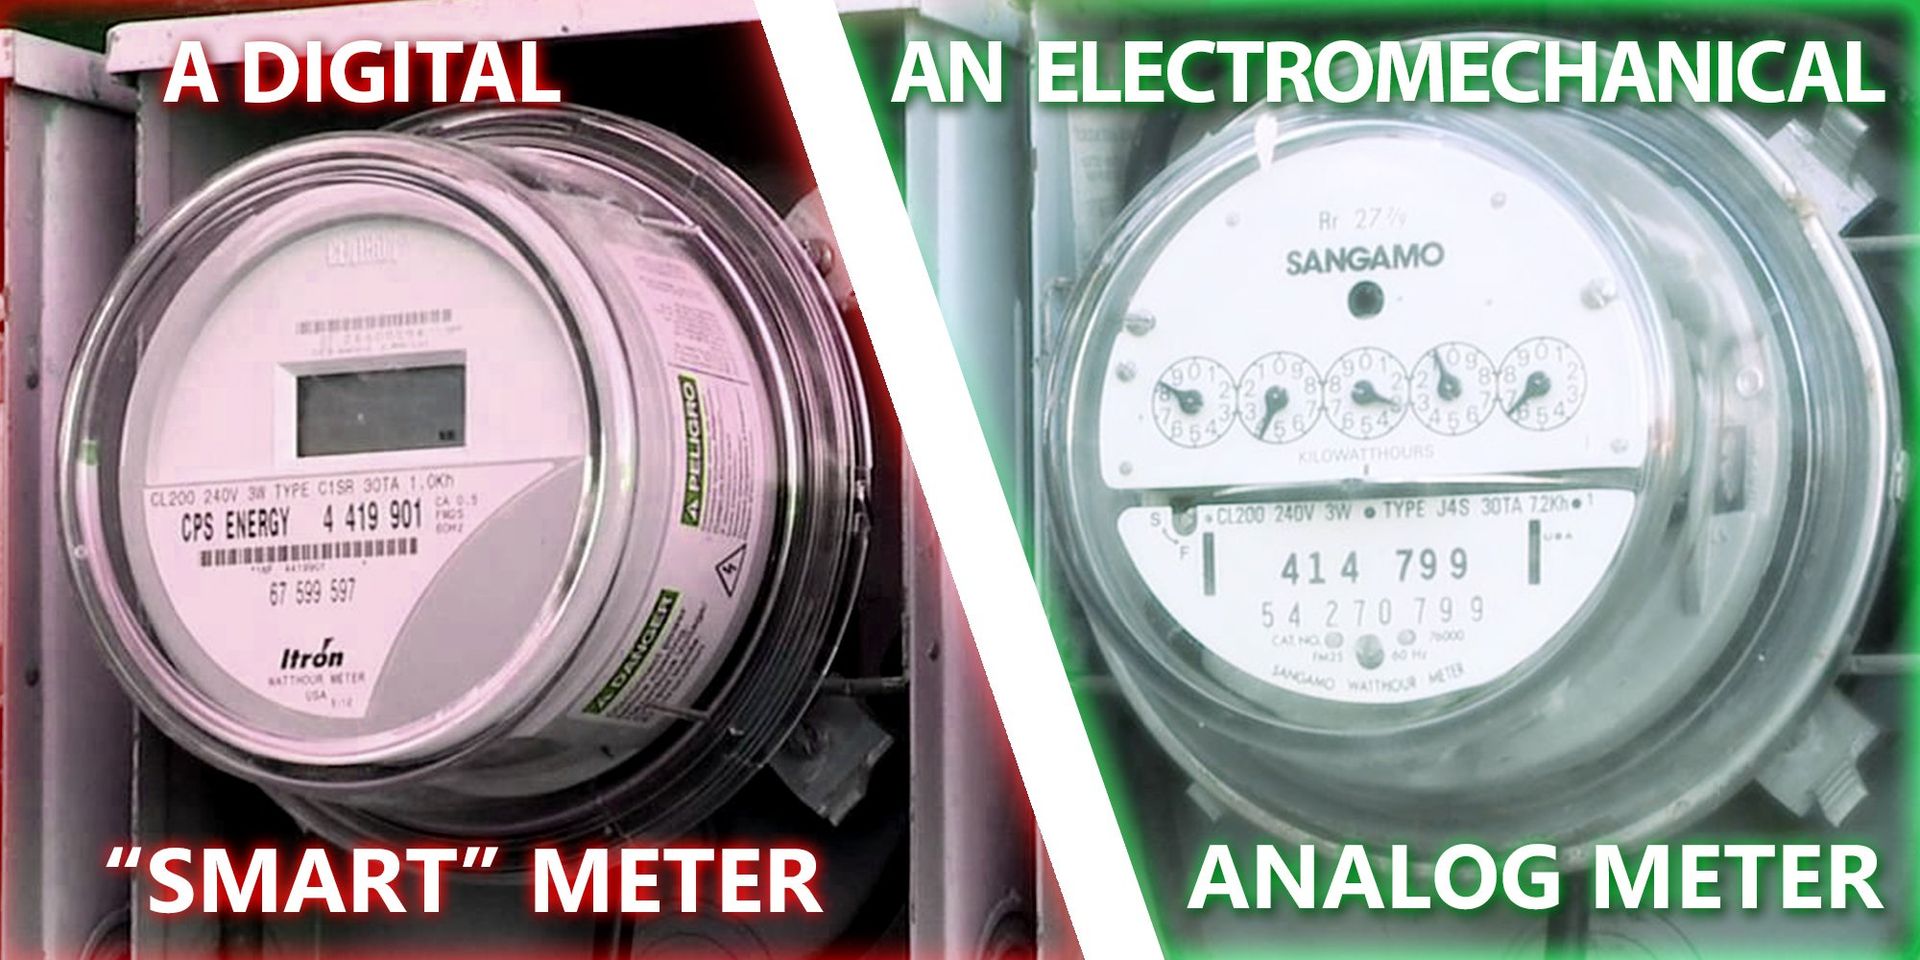 Global Indoor Health Network - Smart meters are harmful to humans and pets